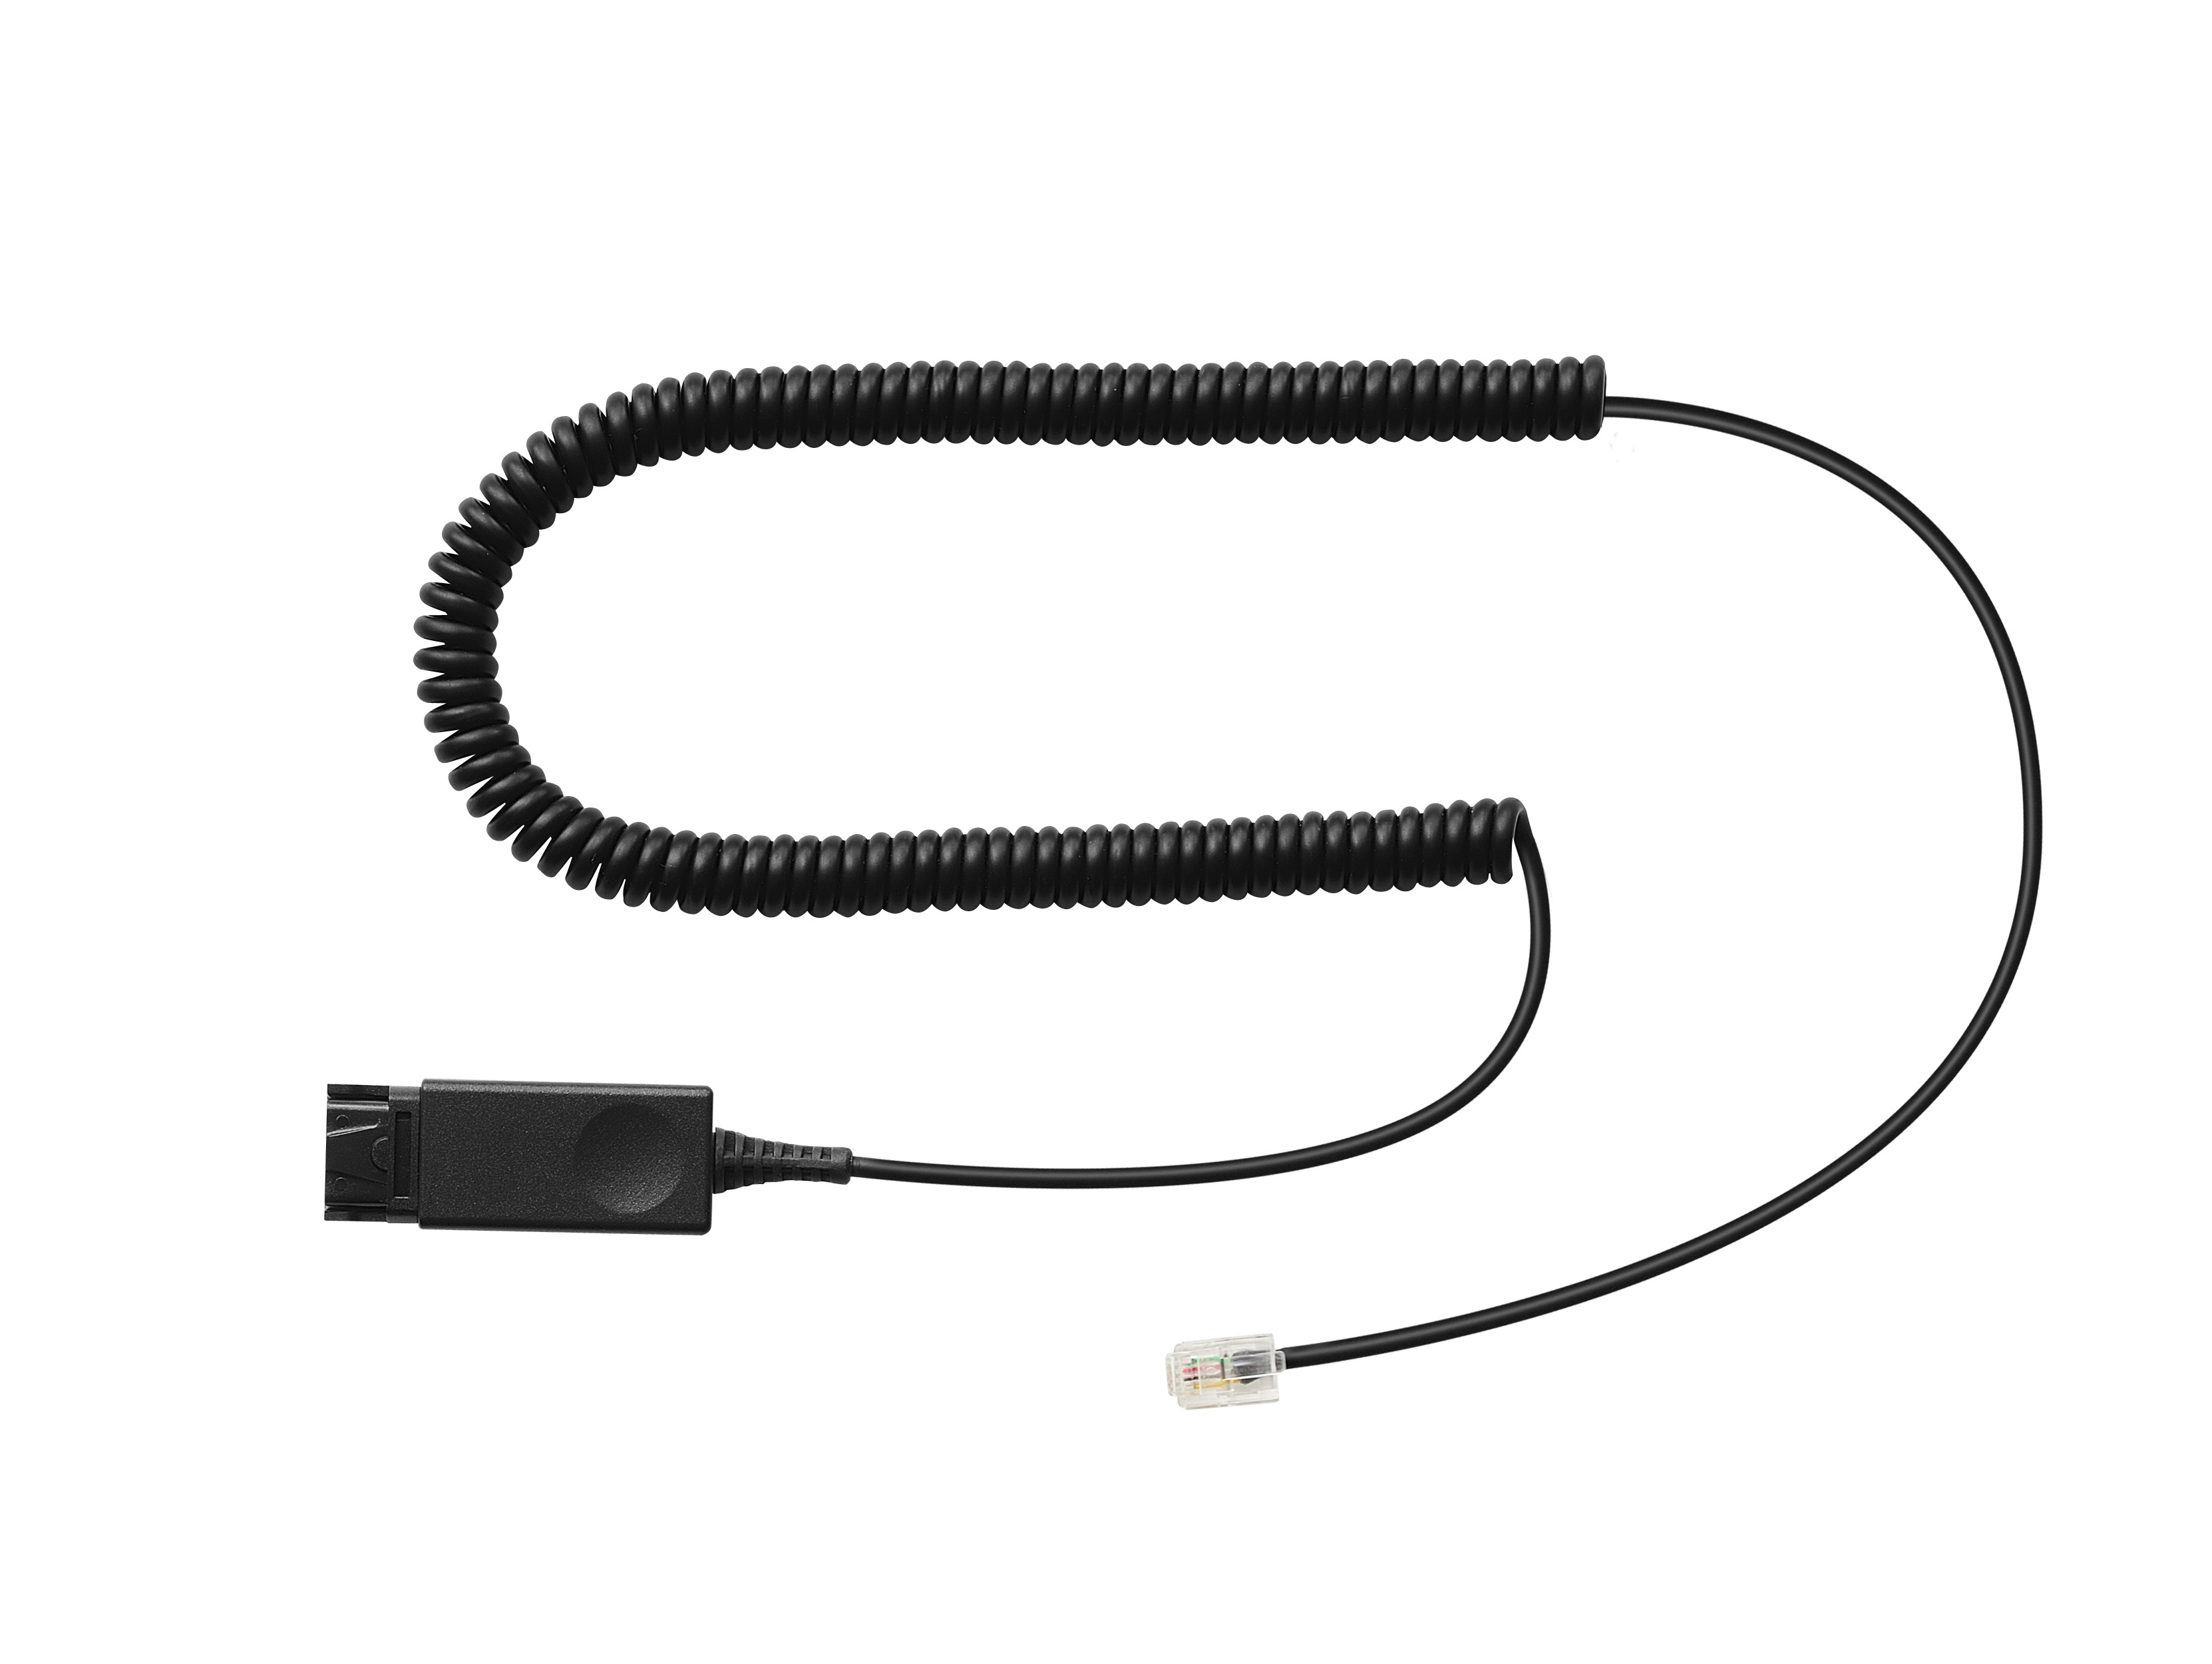 ADDASOUND DN1002 headphone/headset accessory Cable